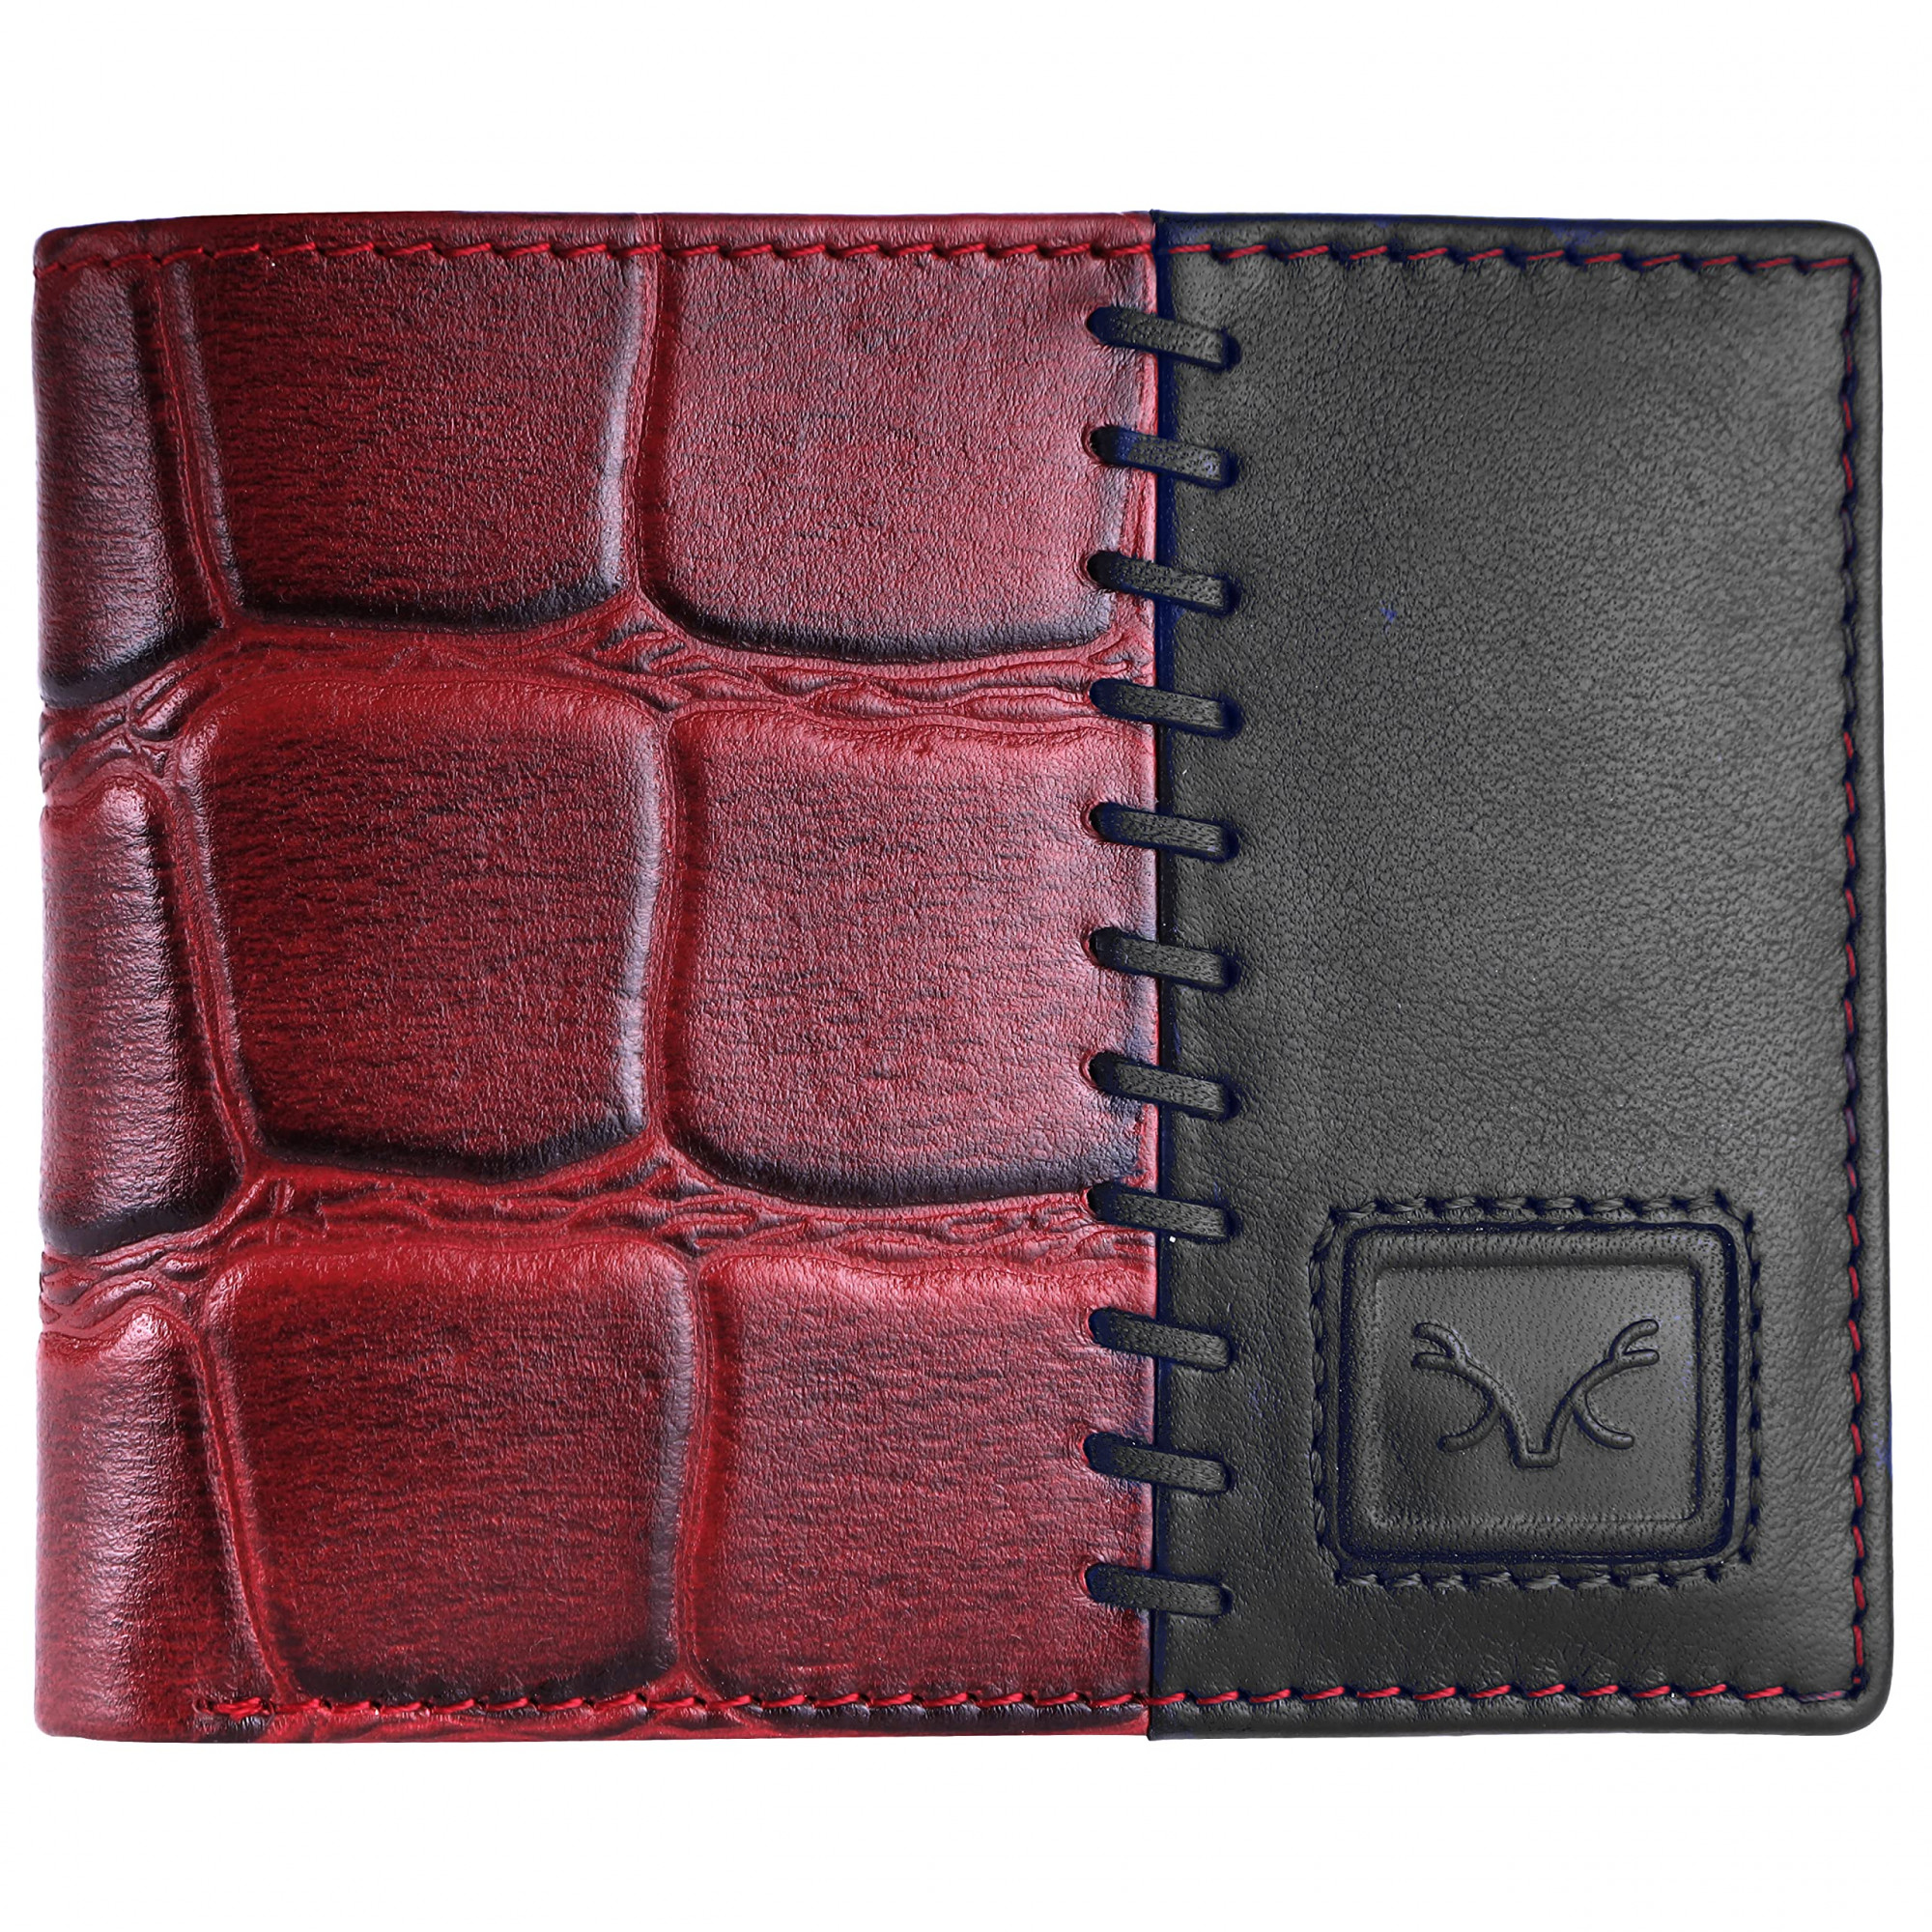 dv Leather wallet with coin purse and inside secret zip compartment - Black  | Wallets Online